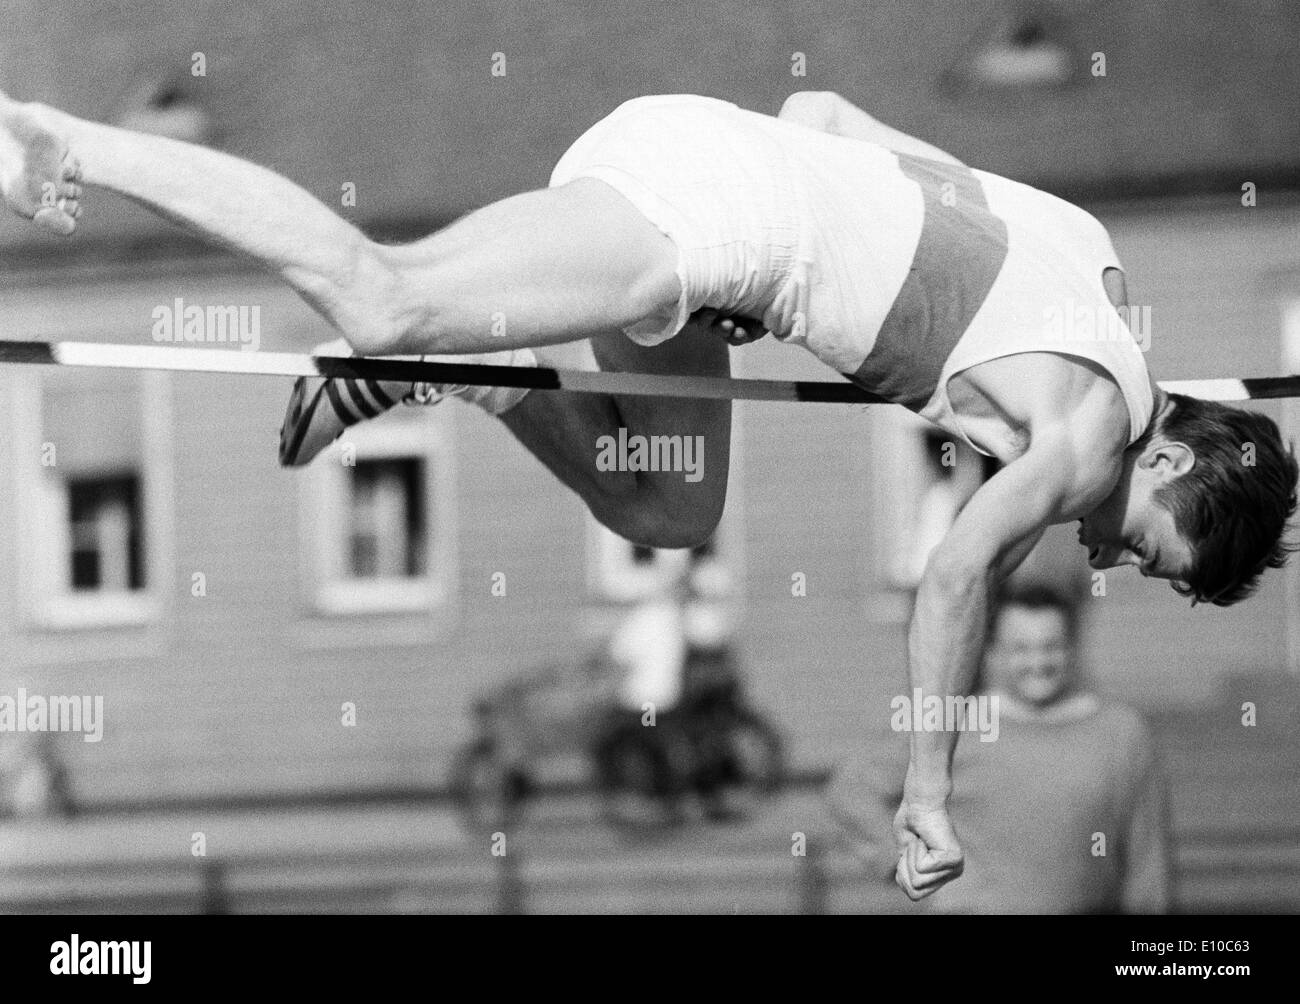 Sixties, black and white photo, sports, athletics, Competition in Athletics 1966 of the Vest Recklinghausen in the Jahn Stadium in Bottrop, high jump, men, high jumper, D-Bottrop, Ruhr area, North Rhine-Westphalia Stock Photo